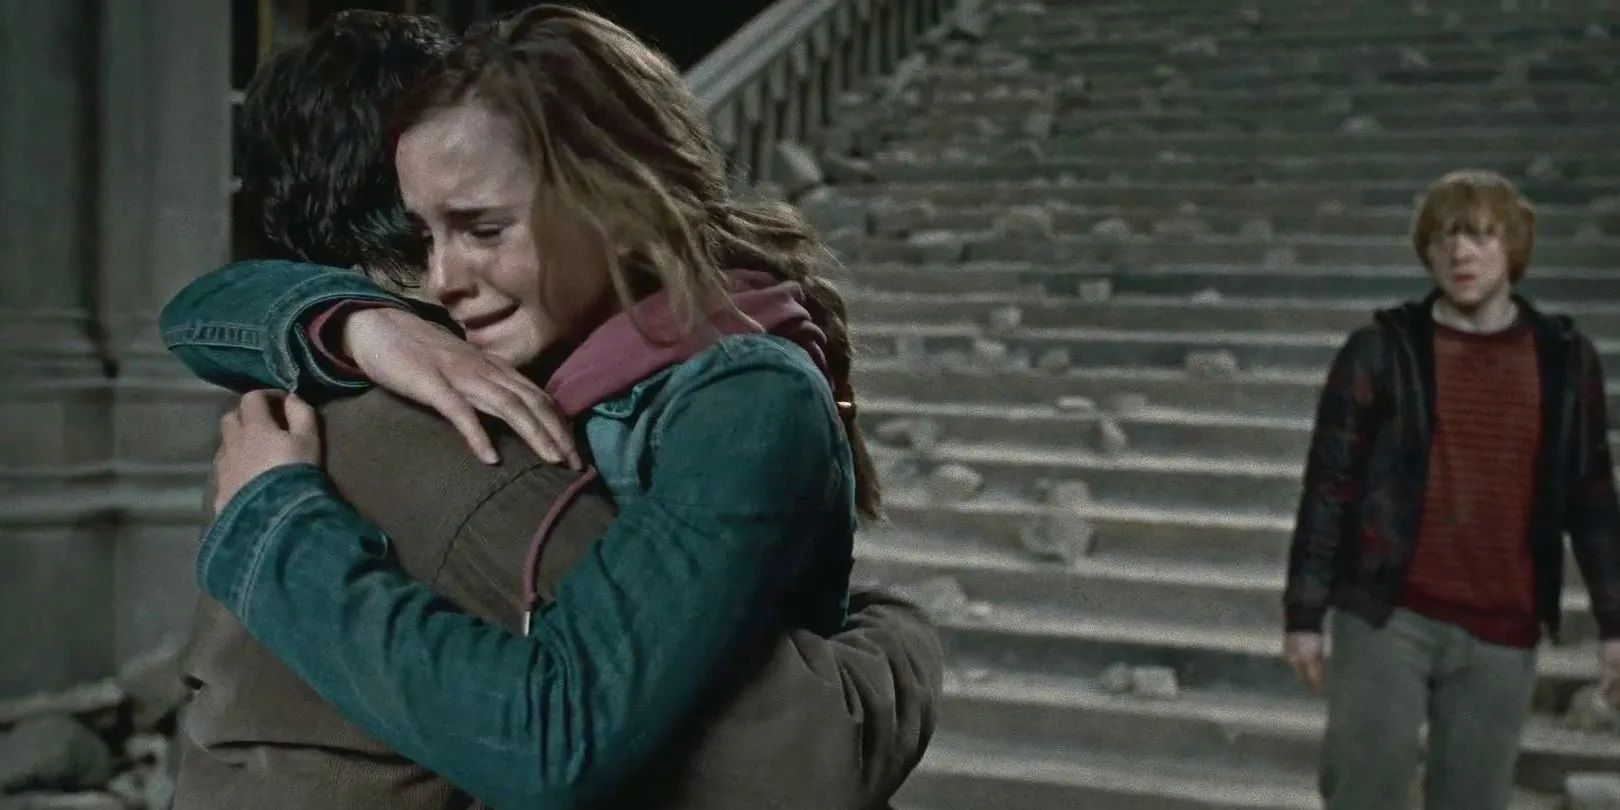 10 Times Hermione Granger Broke Our Hearts In Harry Potter